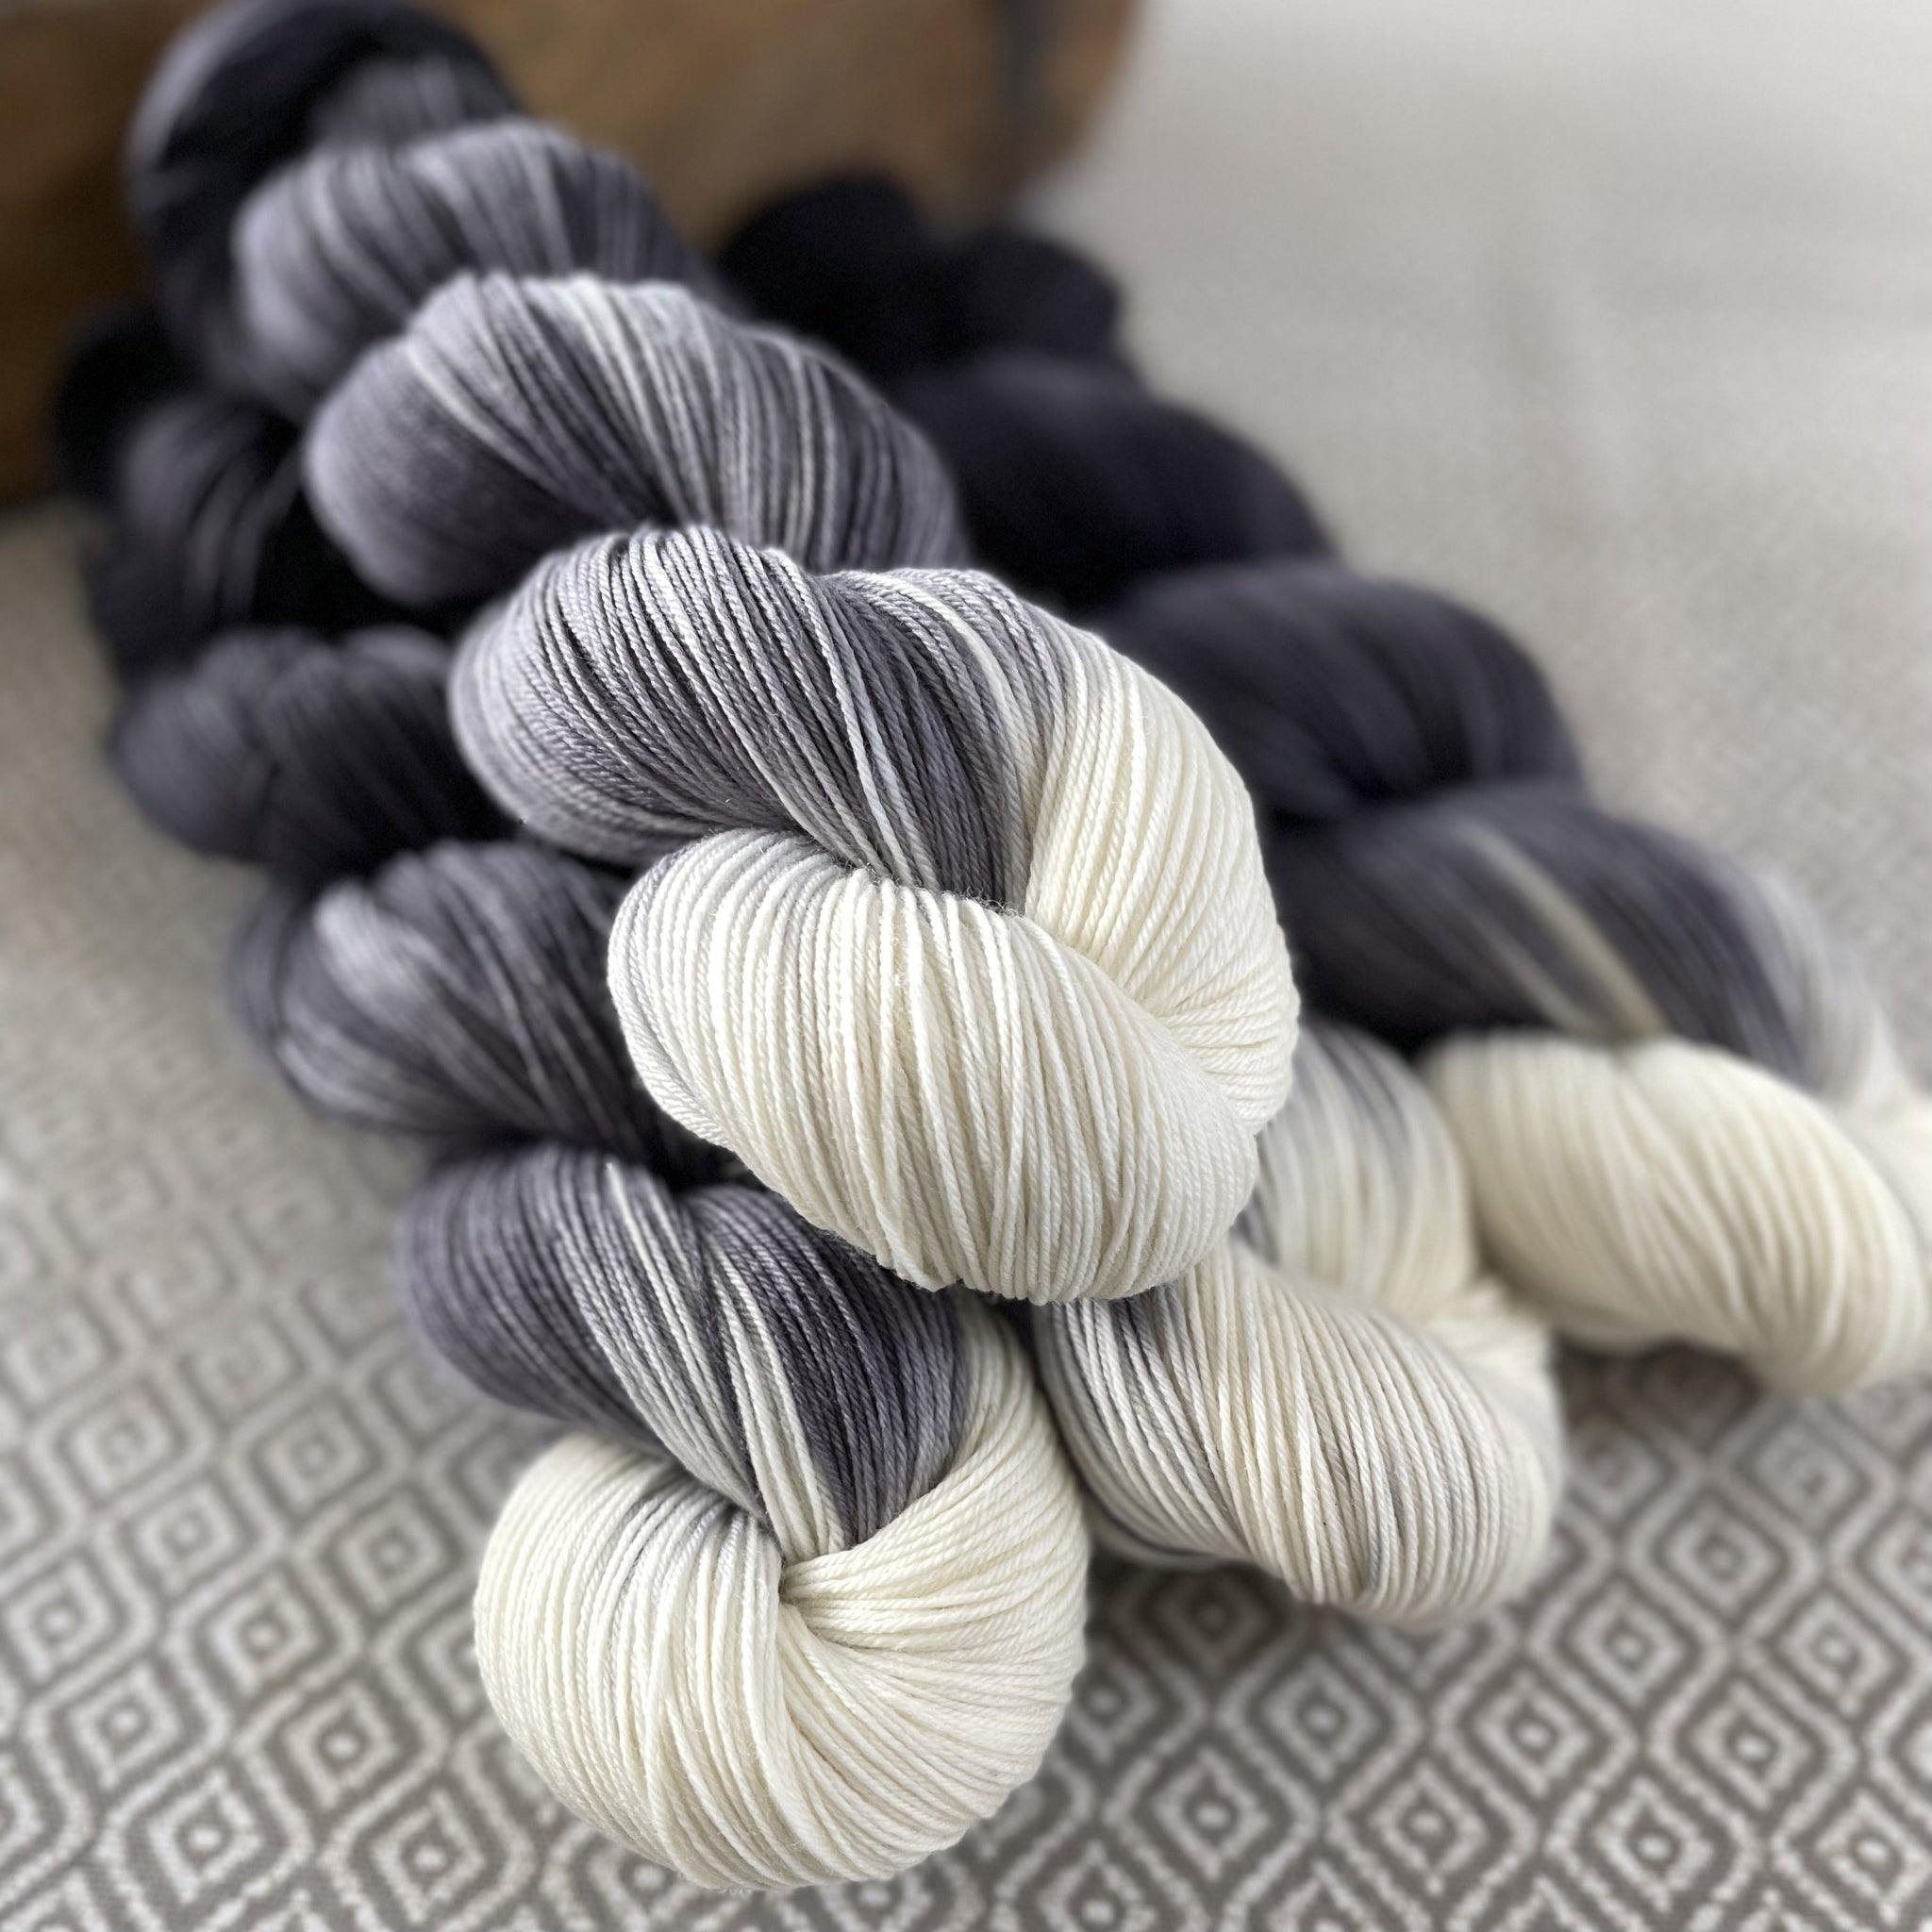 Speckled yarn cakes, 25% off